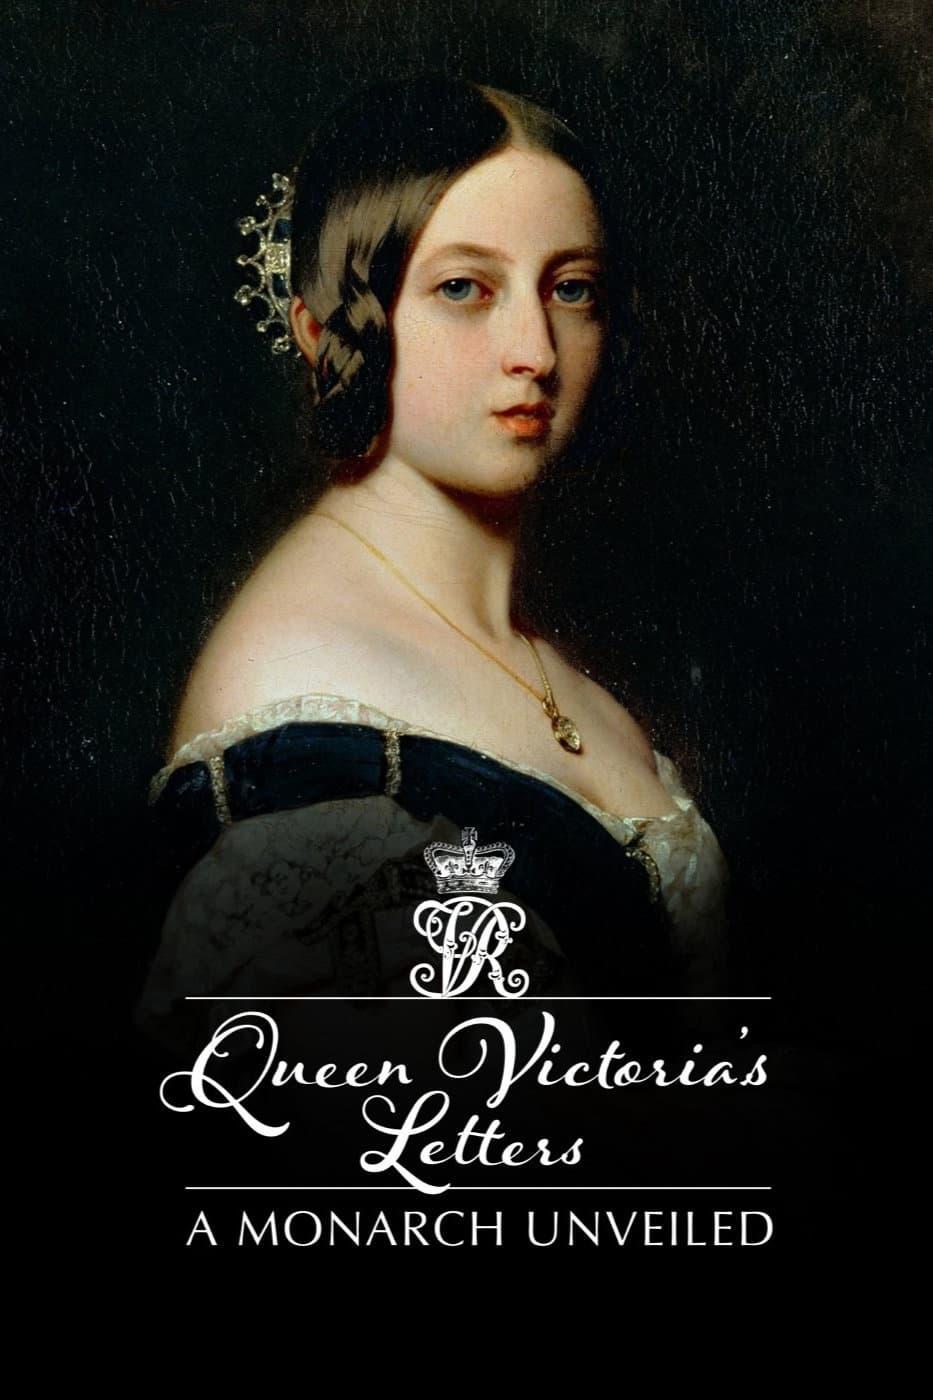 Queen Victoria's Letters: A Monarch Unveiled poster